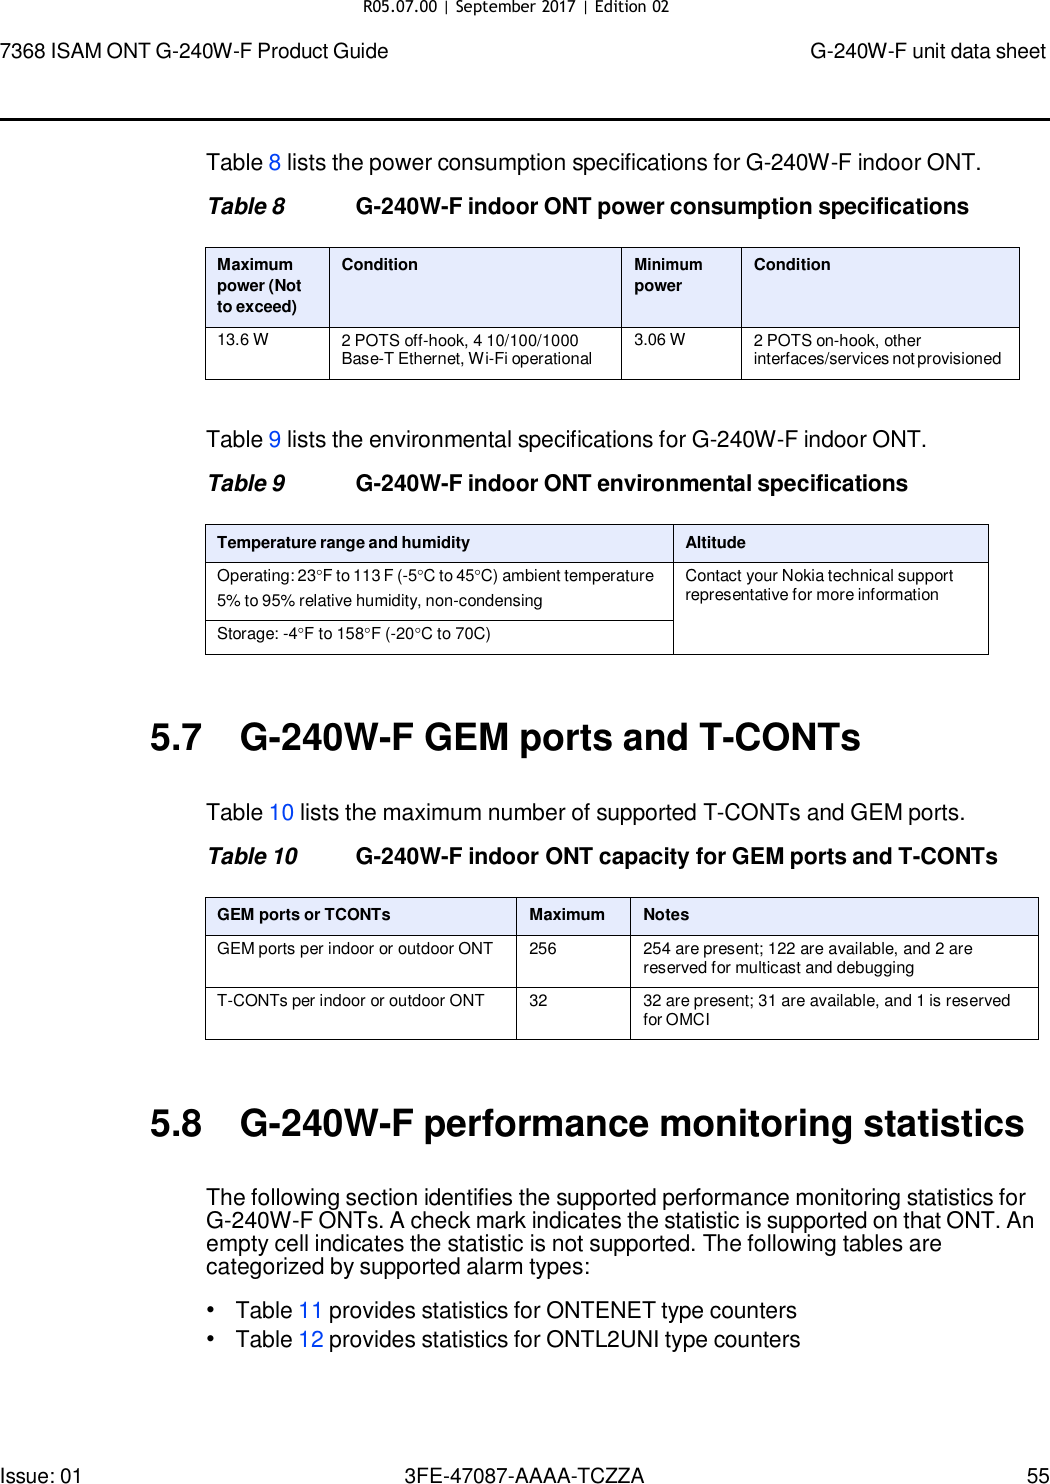 Page 52 of Nokia Bell G240WFV2 7368 ISAM GPON ONU User Manual 7368 ISAM ONT G 240W F Product Guide